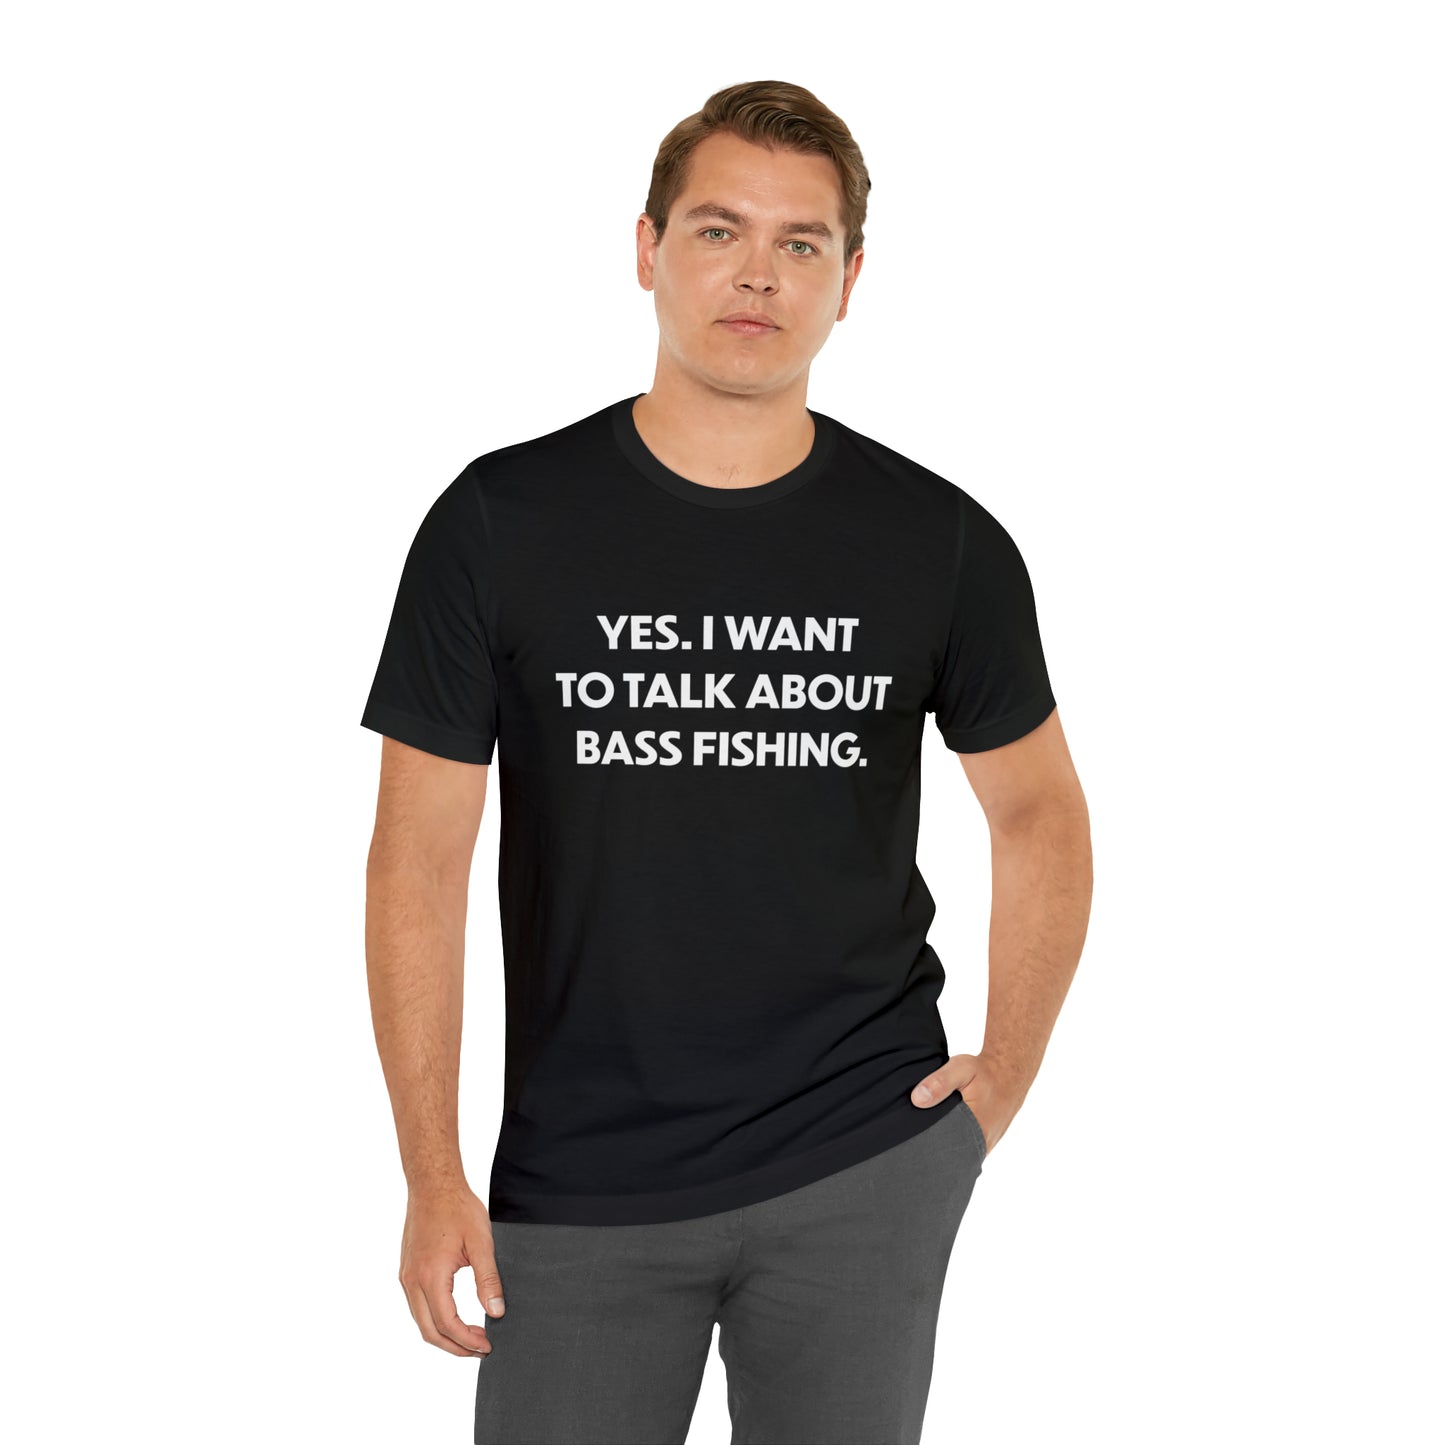 Yes. I want to talk about bass fishing. t-shirt